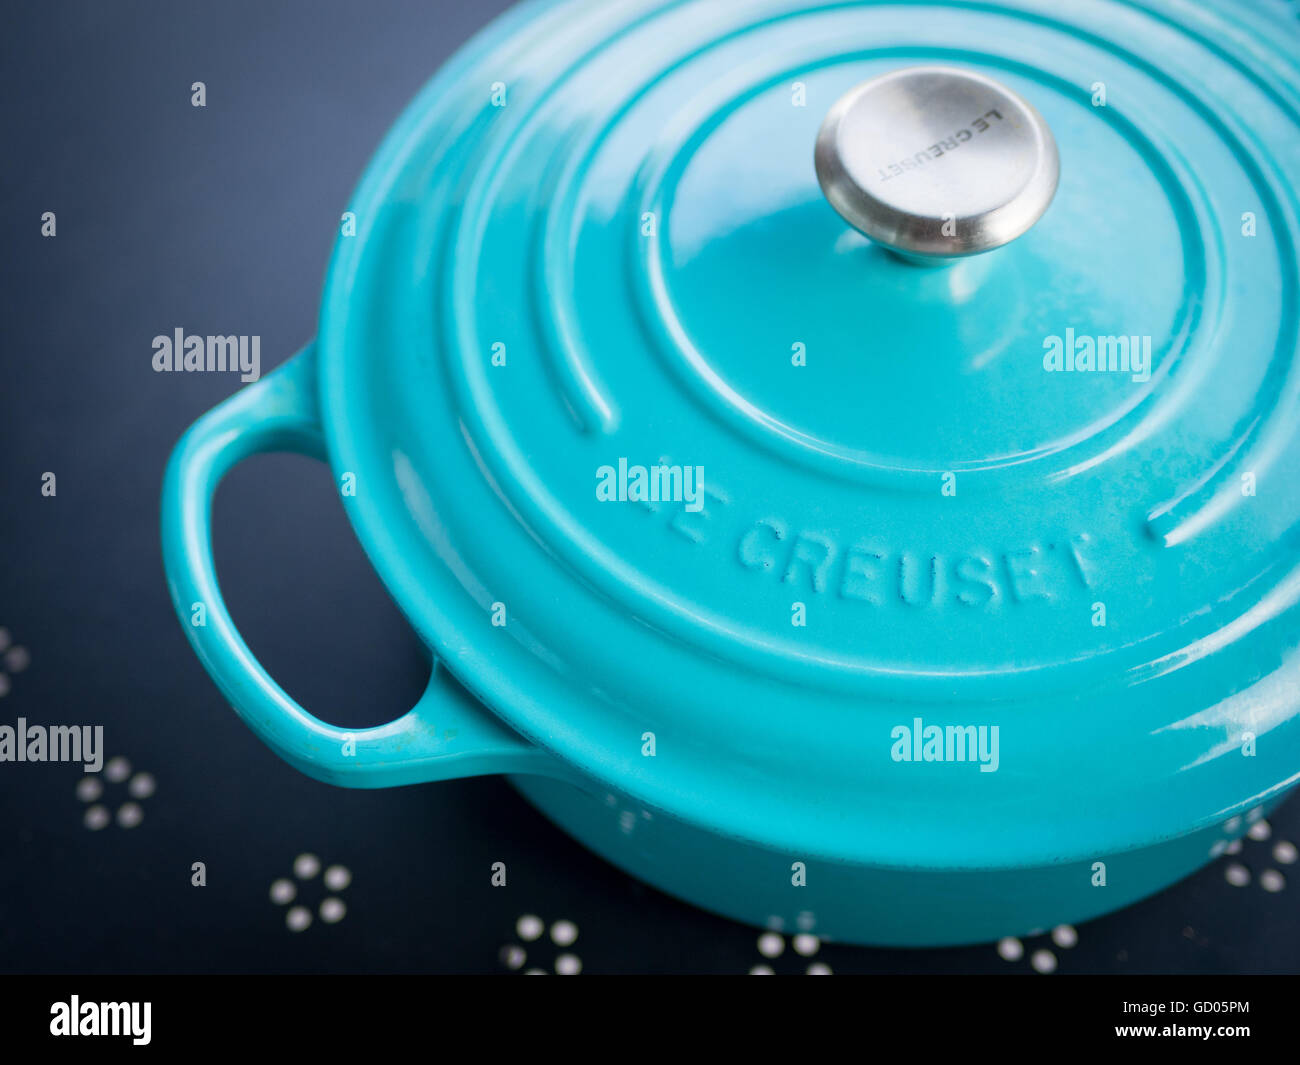 A signature Le Creuset enameled cast-iron French oven in "Caribbean" ( turquoise) colour Stock Photo - Alamy